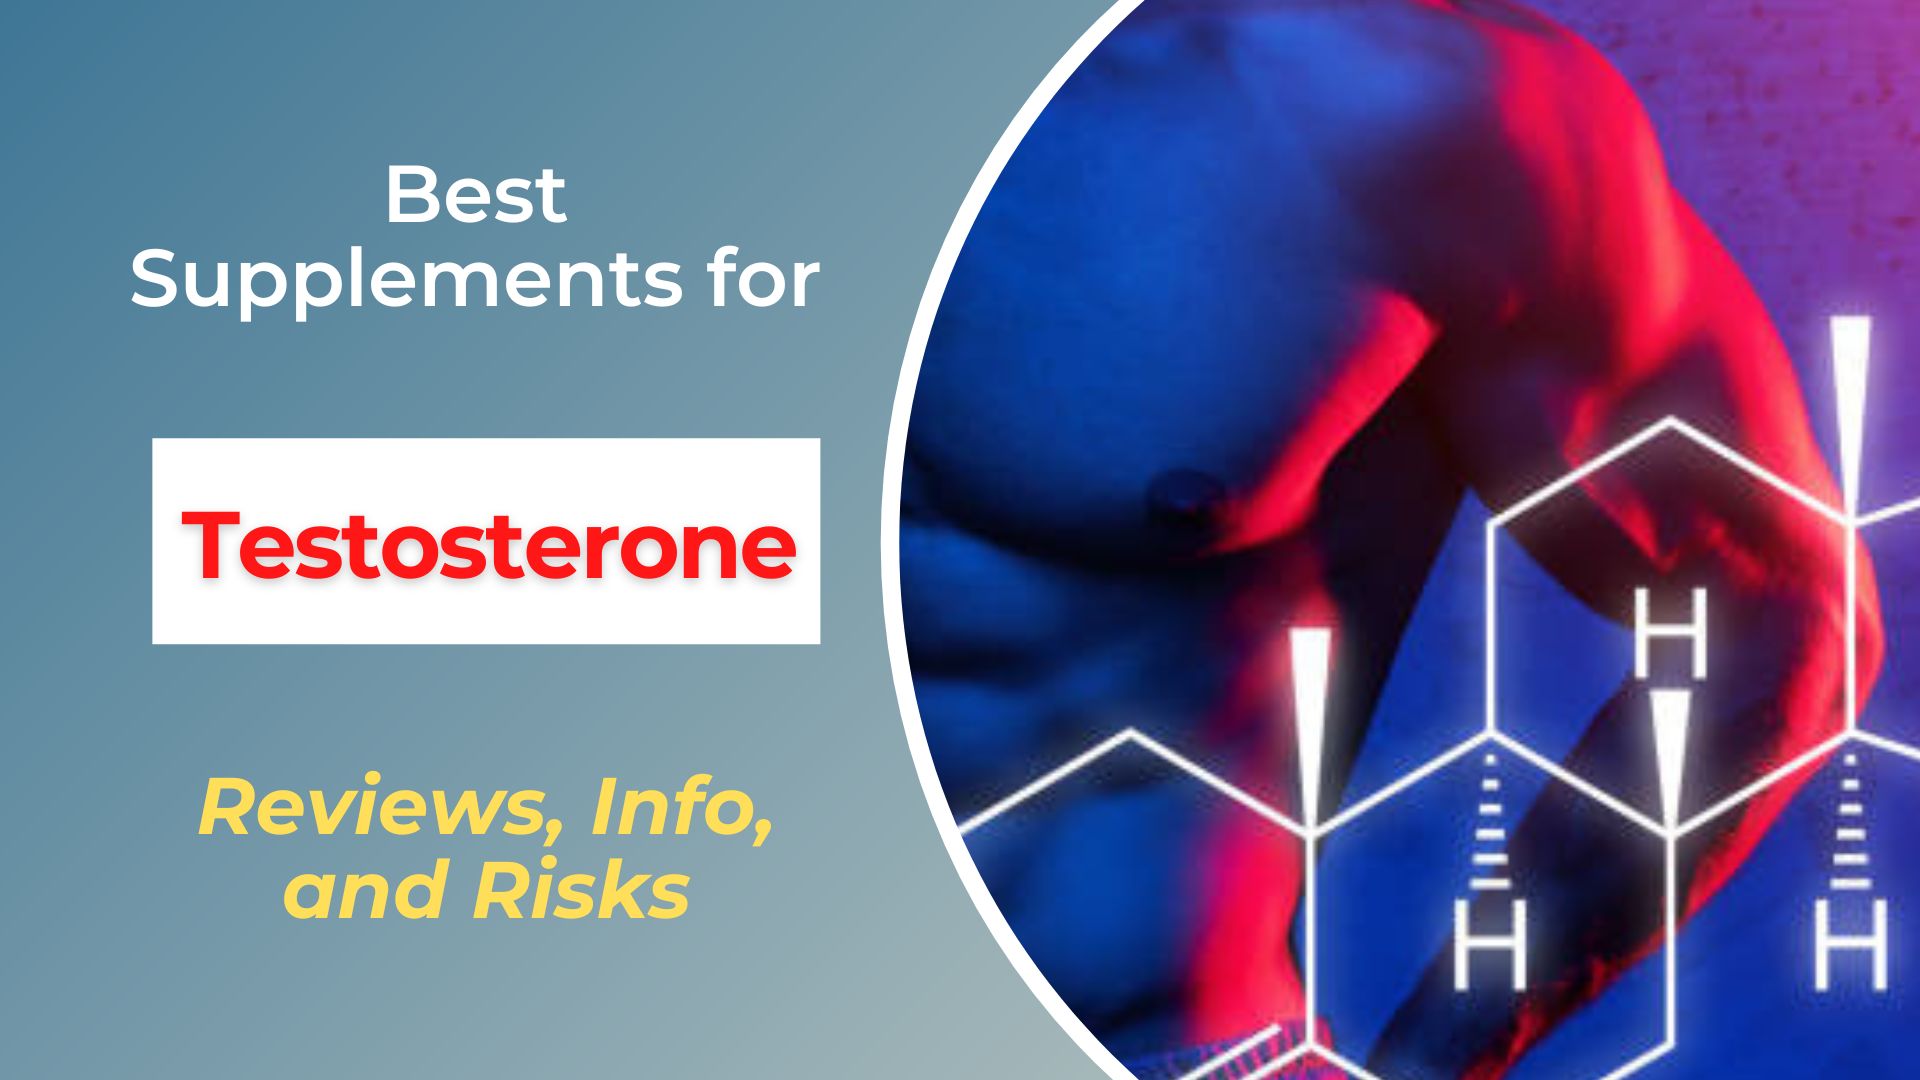 Best Supplements for Testosterone